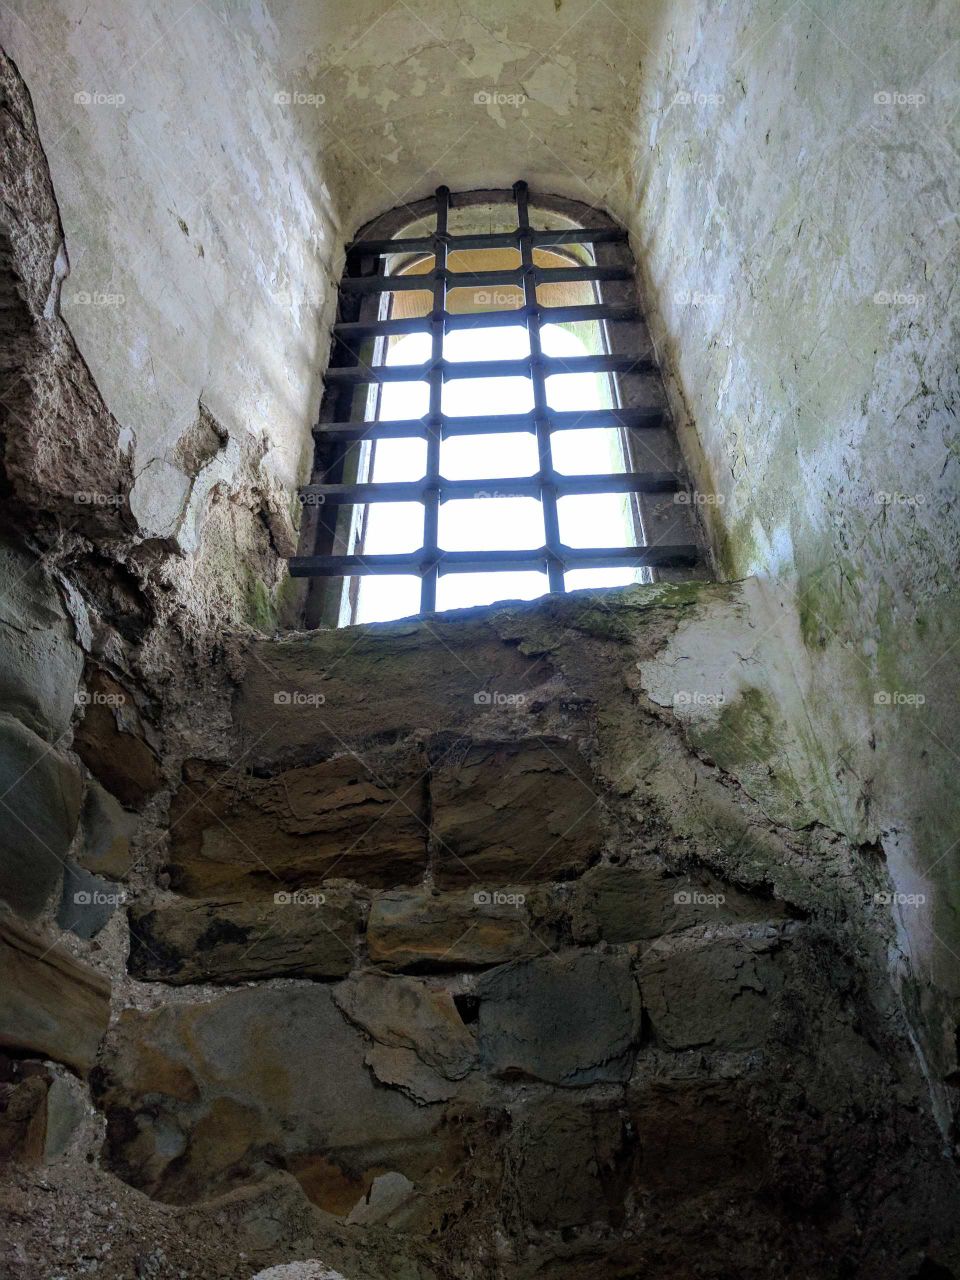 looking through the castle window